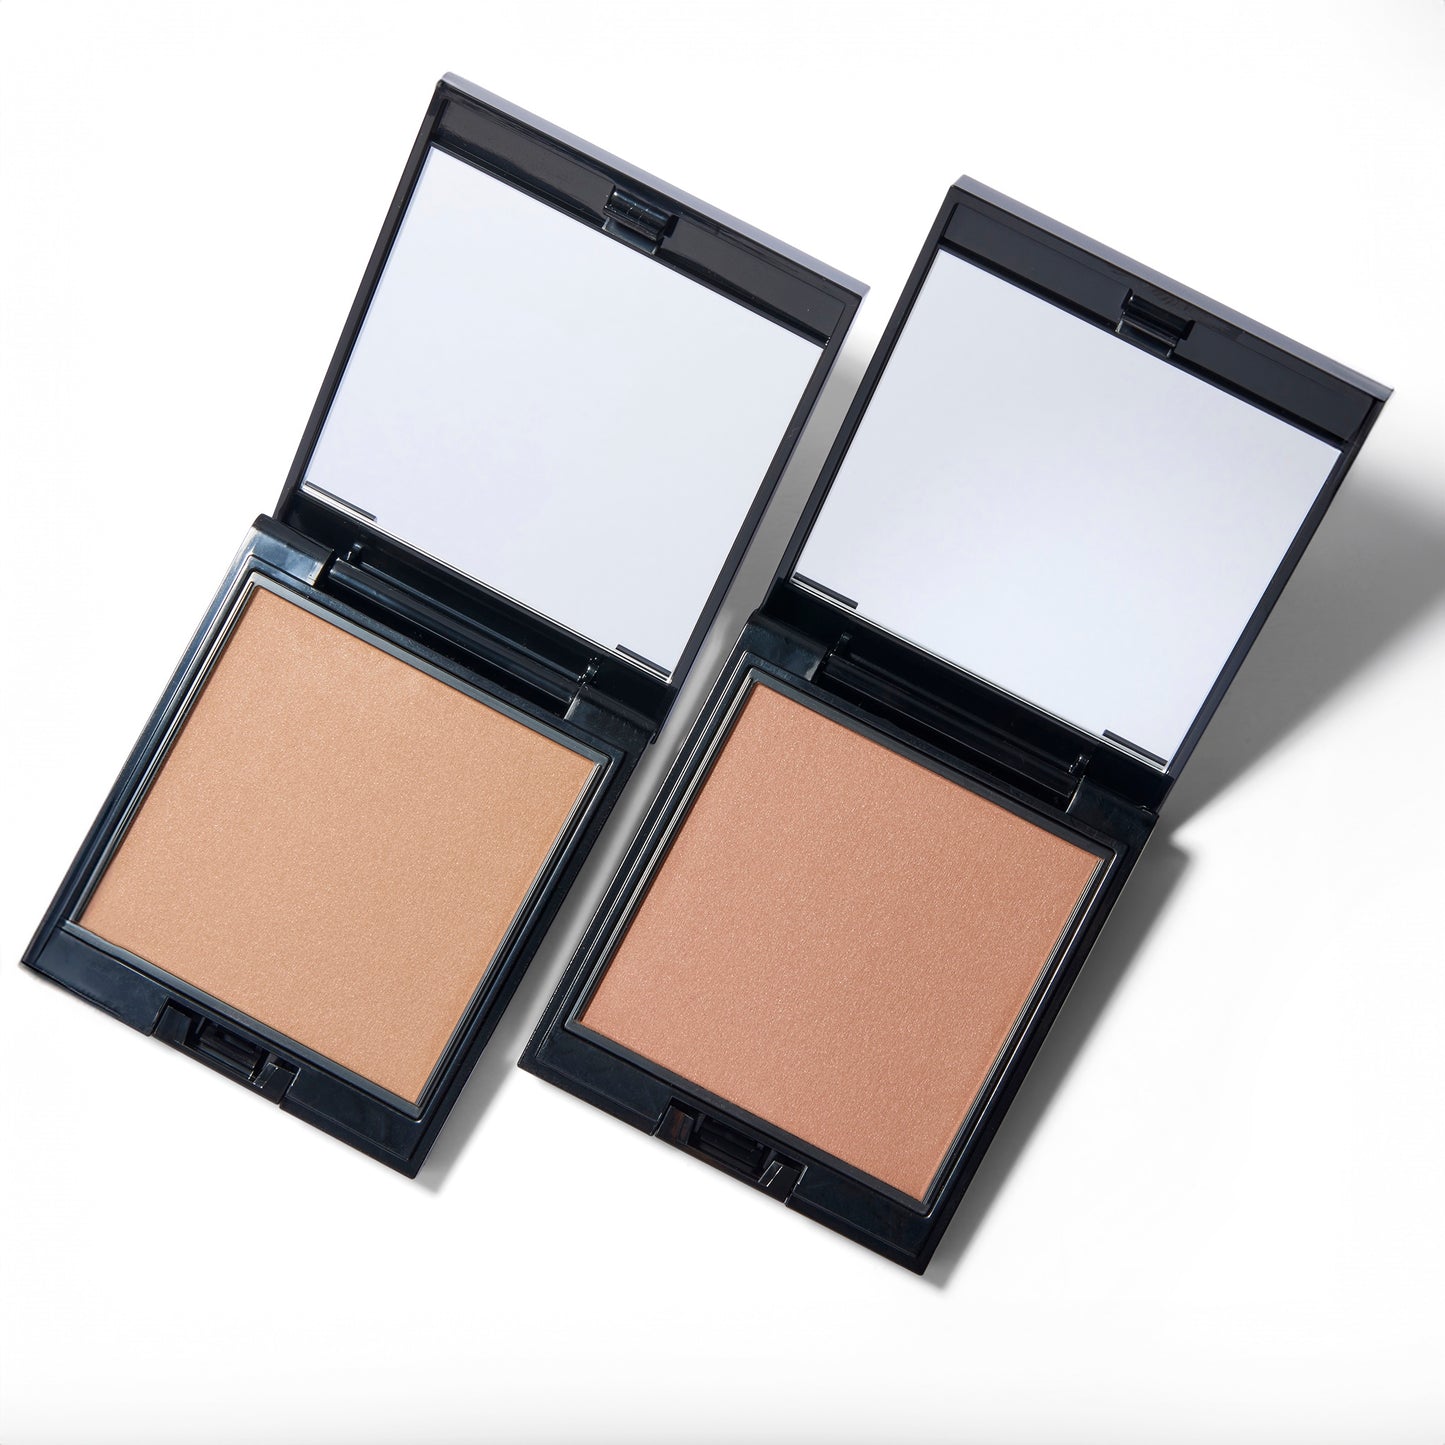 Two powder bronzer compacts next to each other at an angle. They are both open with the mirrors visible.